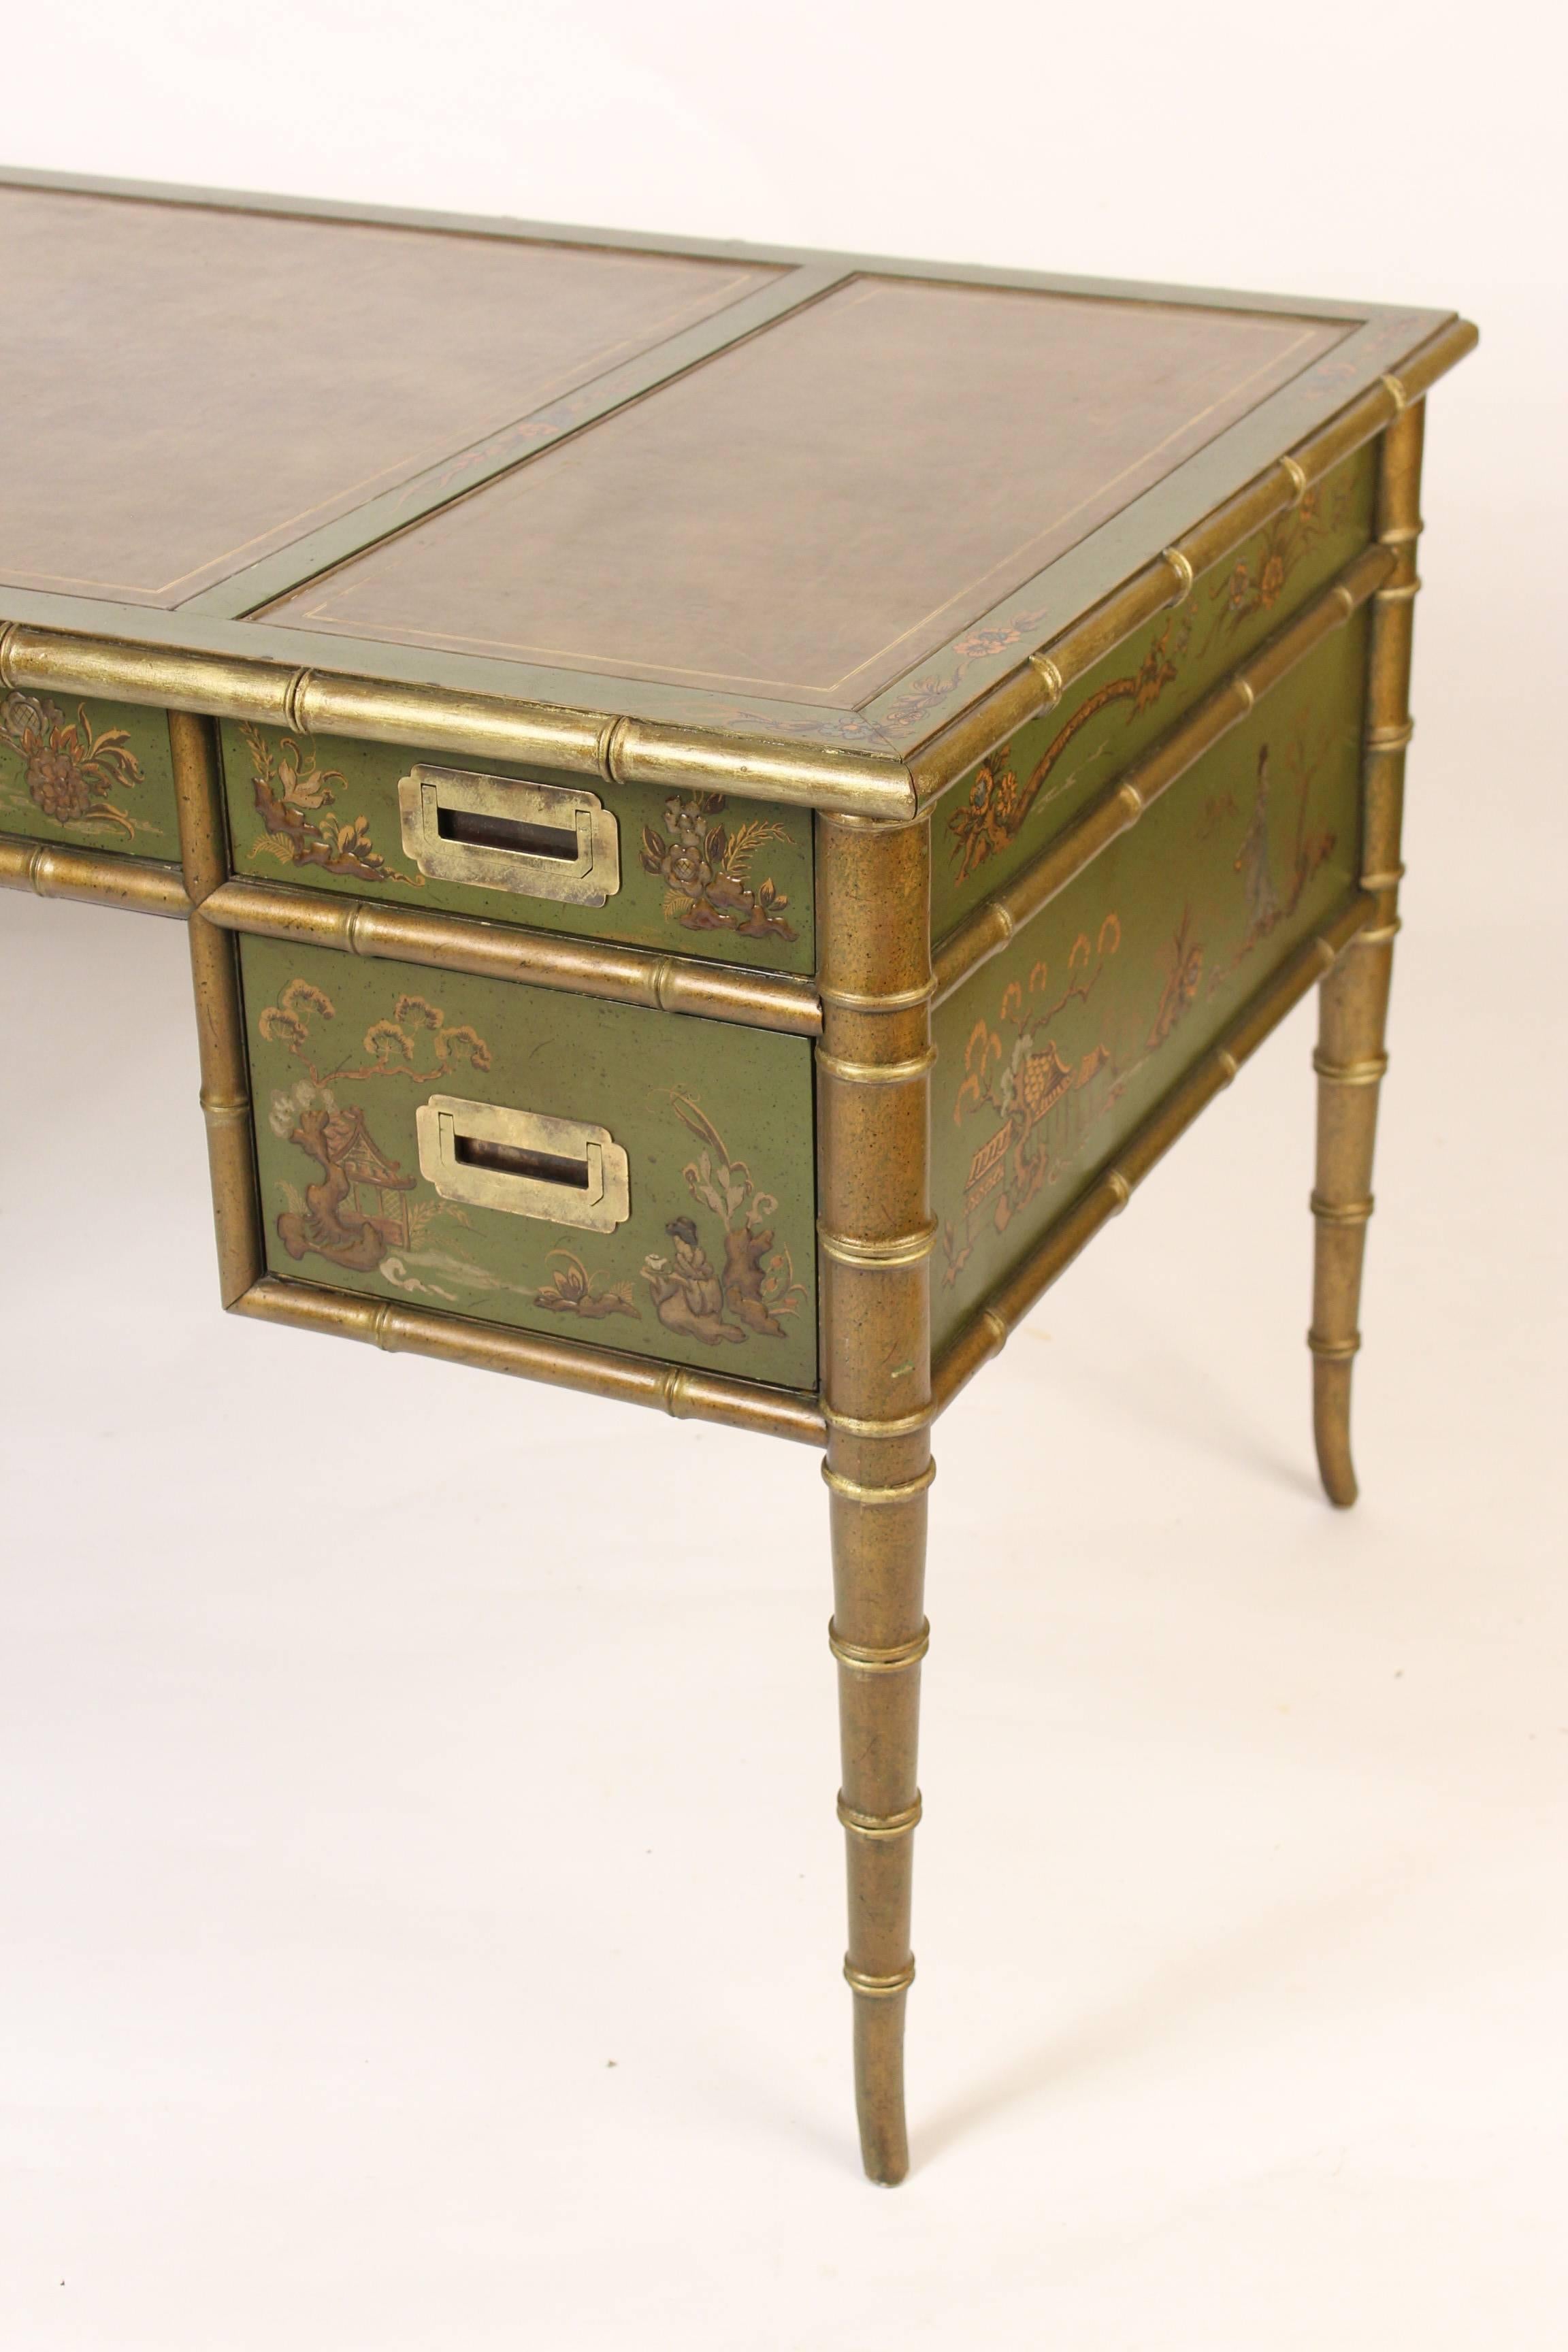 English Regency style chinoiserie decorated desk with Campaign hardware and a leather top, circa 1980s. Attributed to Drexel.